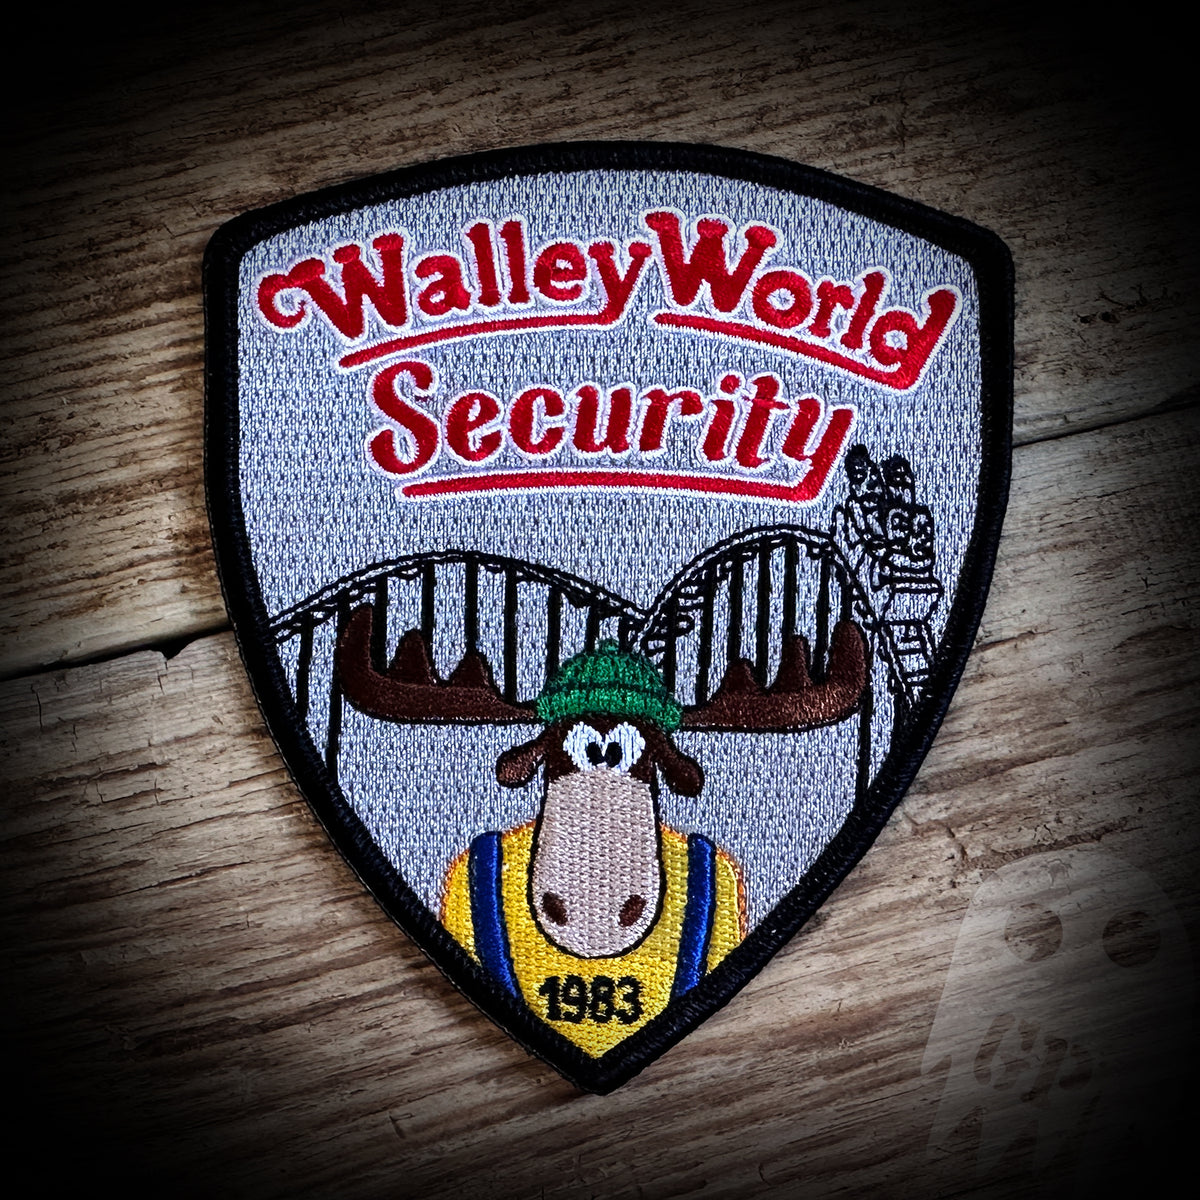 72 - Walley World Security Patch - National Lampoon's Vacation – GHOST PATCH